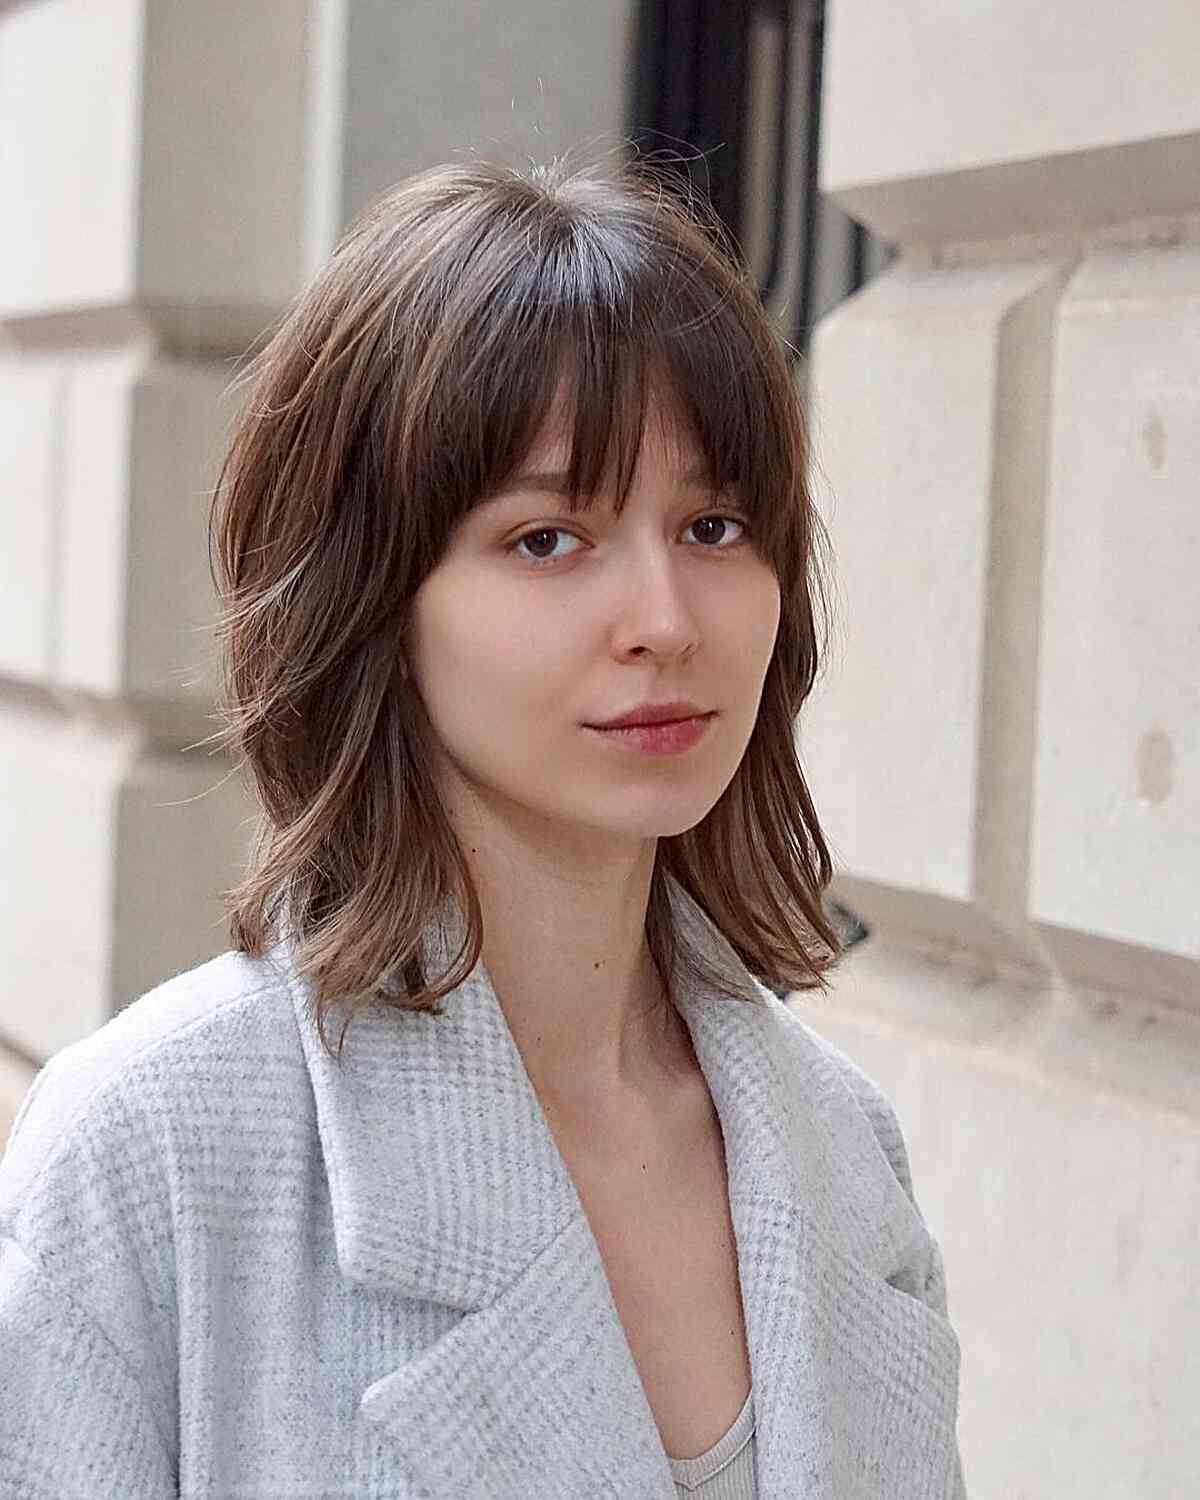 Classic Blow Dry for Medium-Length Hair with Bangs